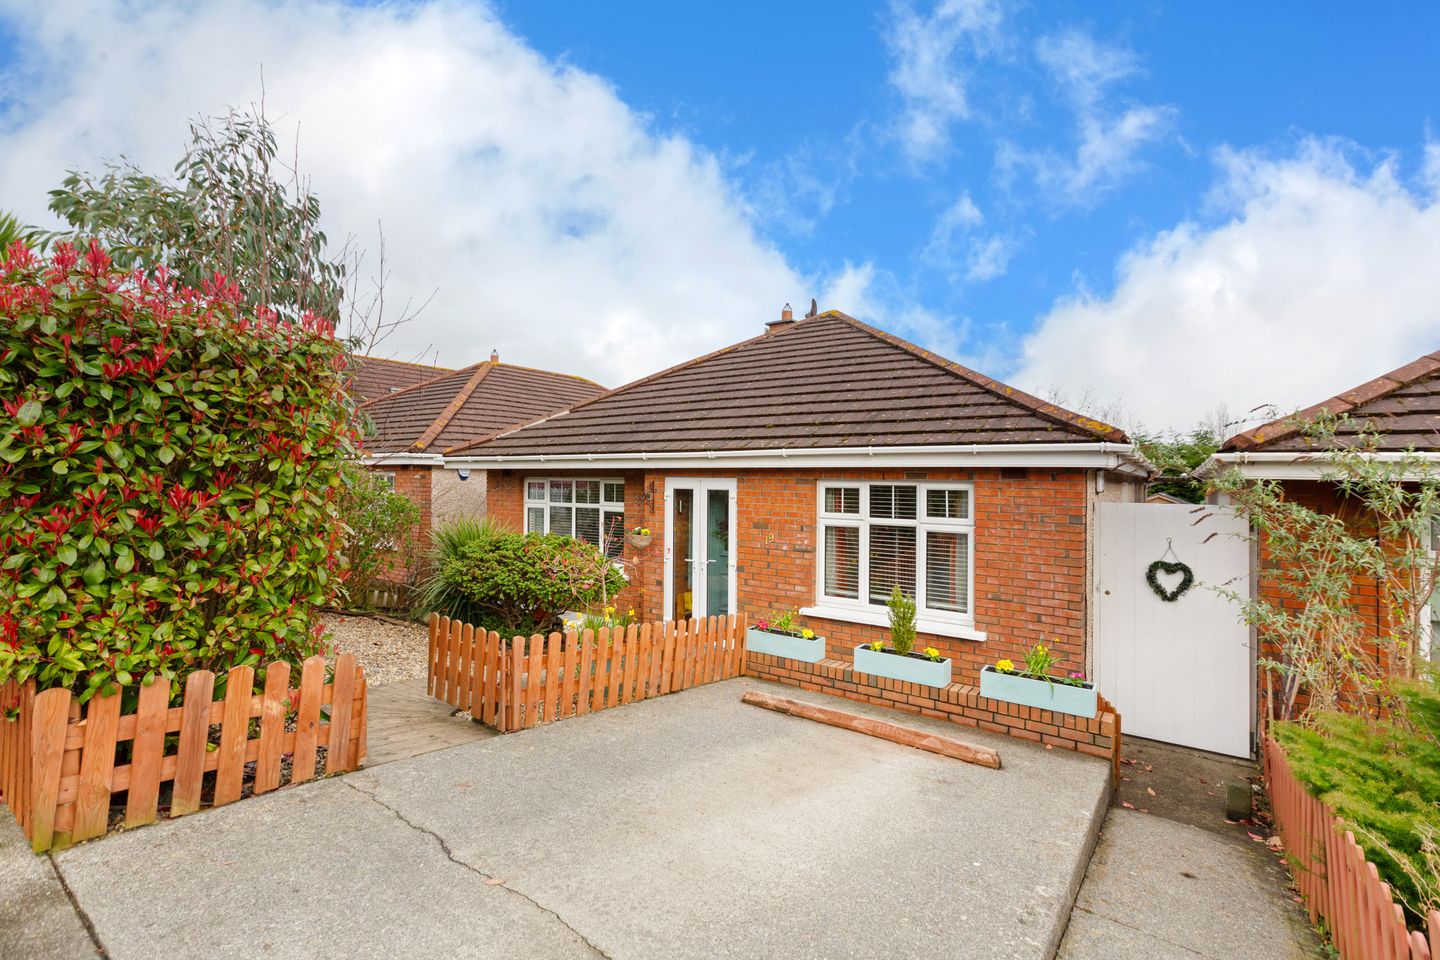 19 The Pines, Arklow, Co Wicklow, Y14TA44